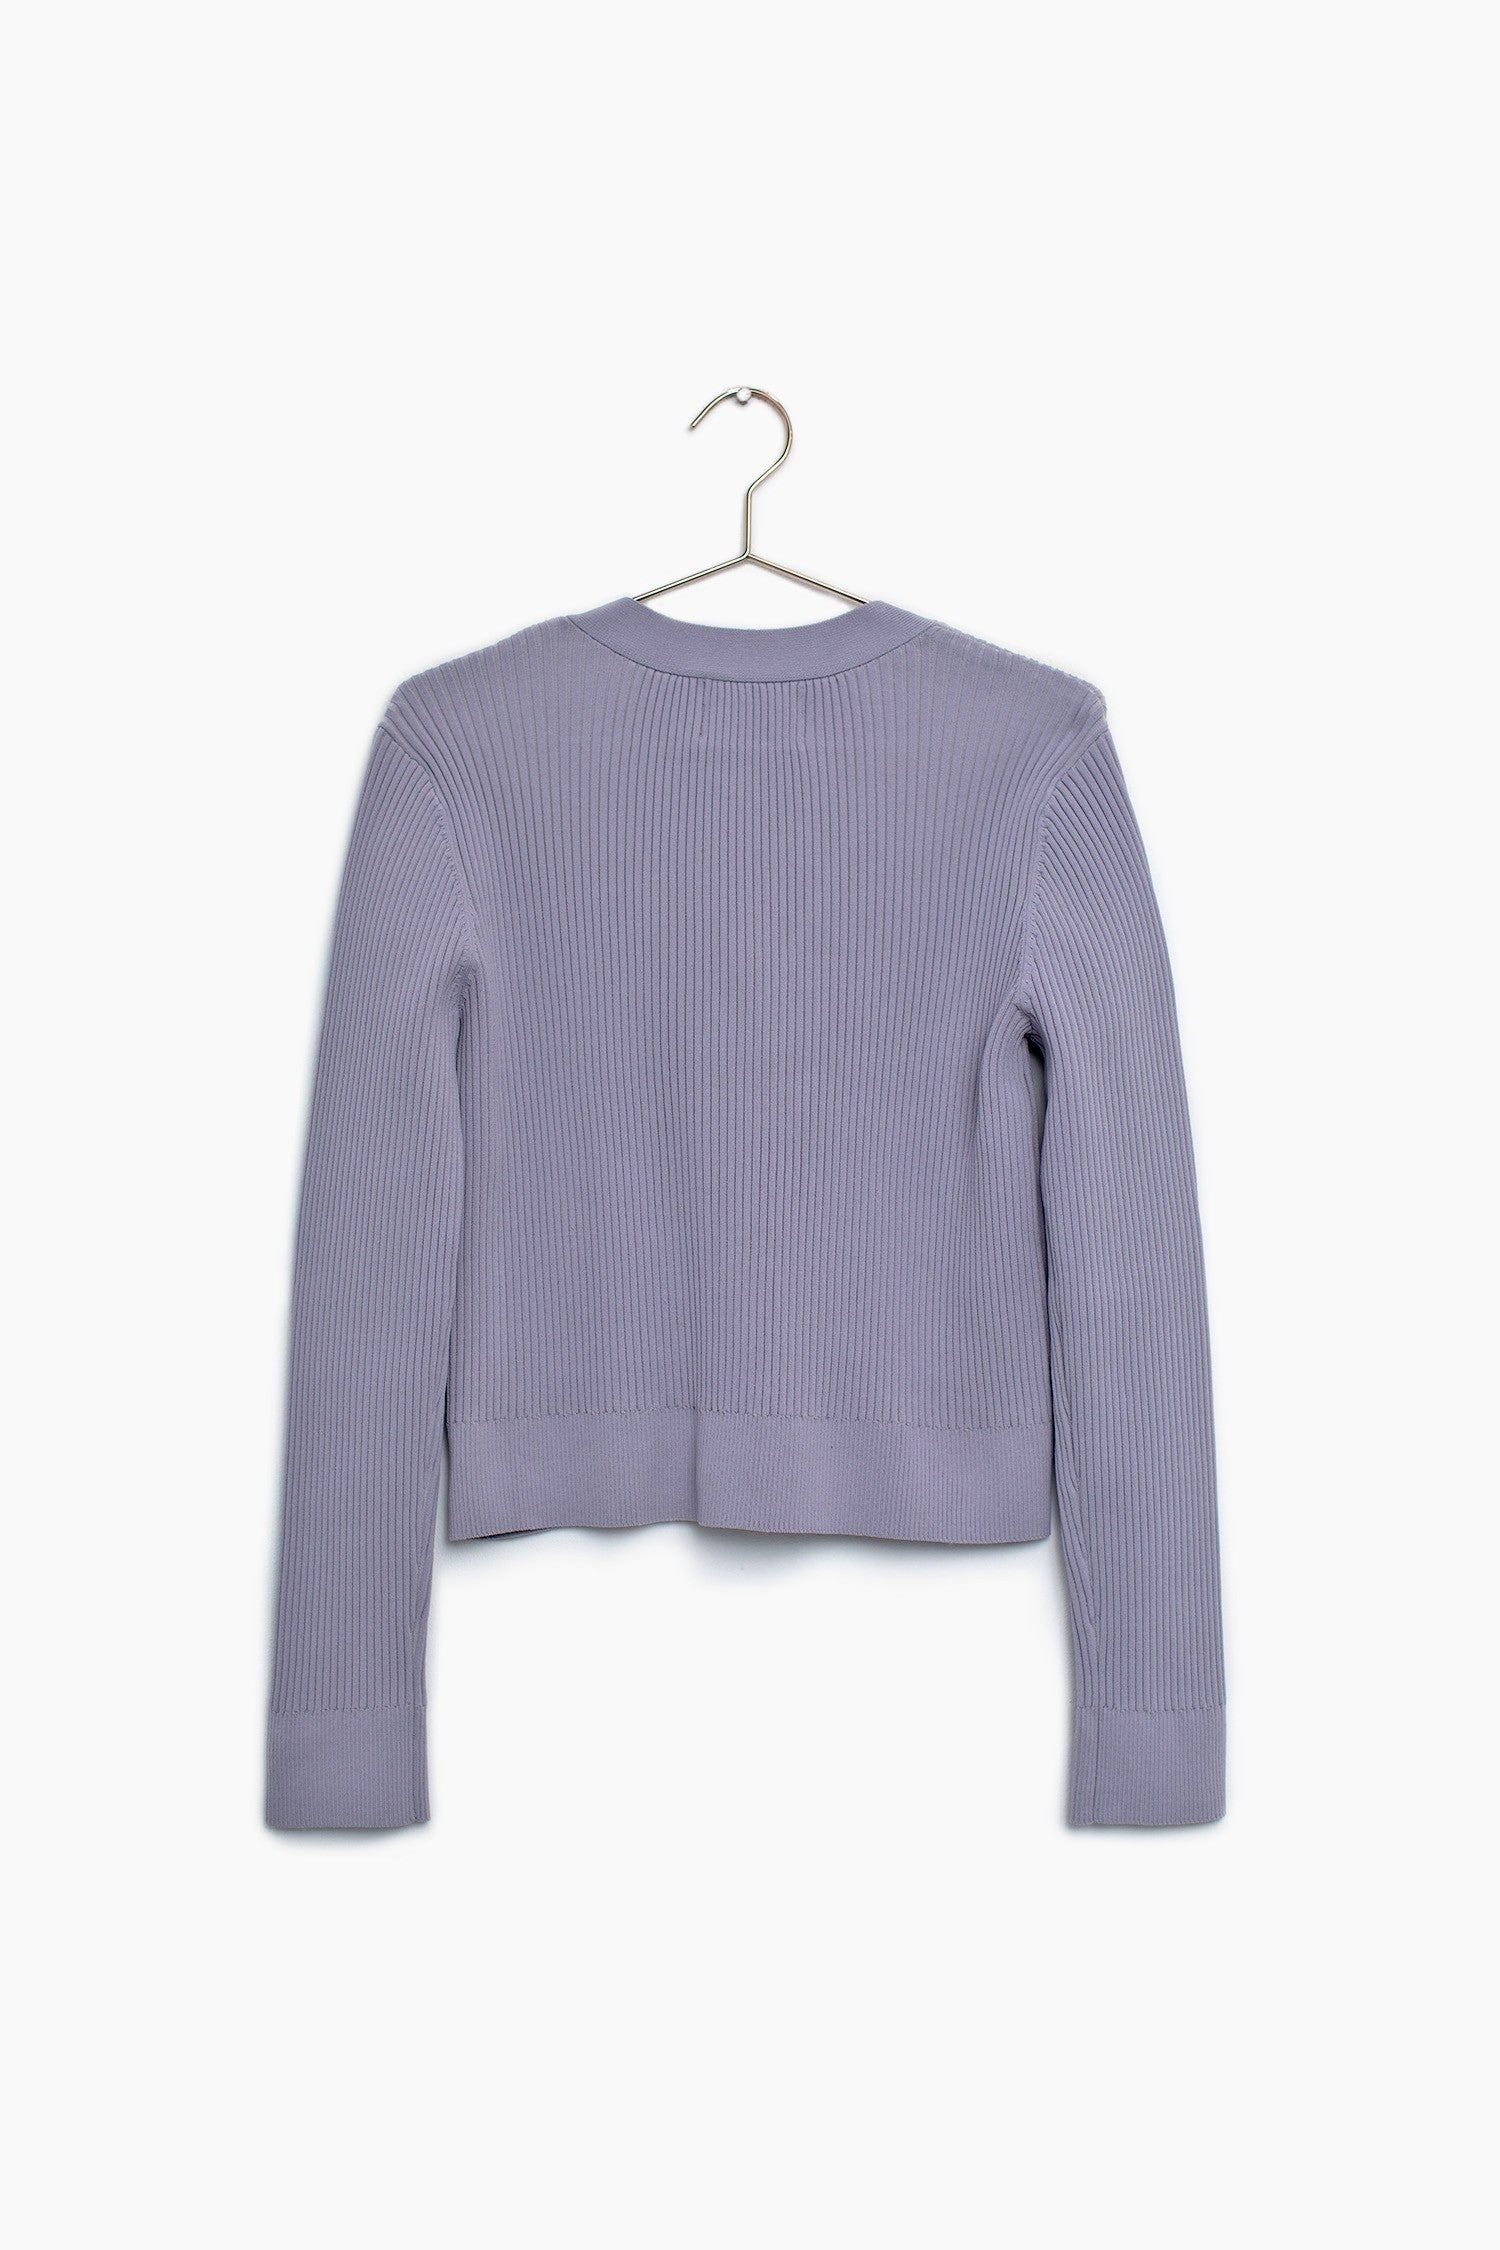 The back of the lilac button up cardigan sweater 